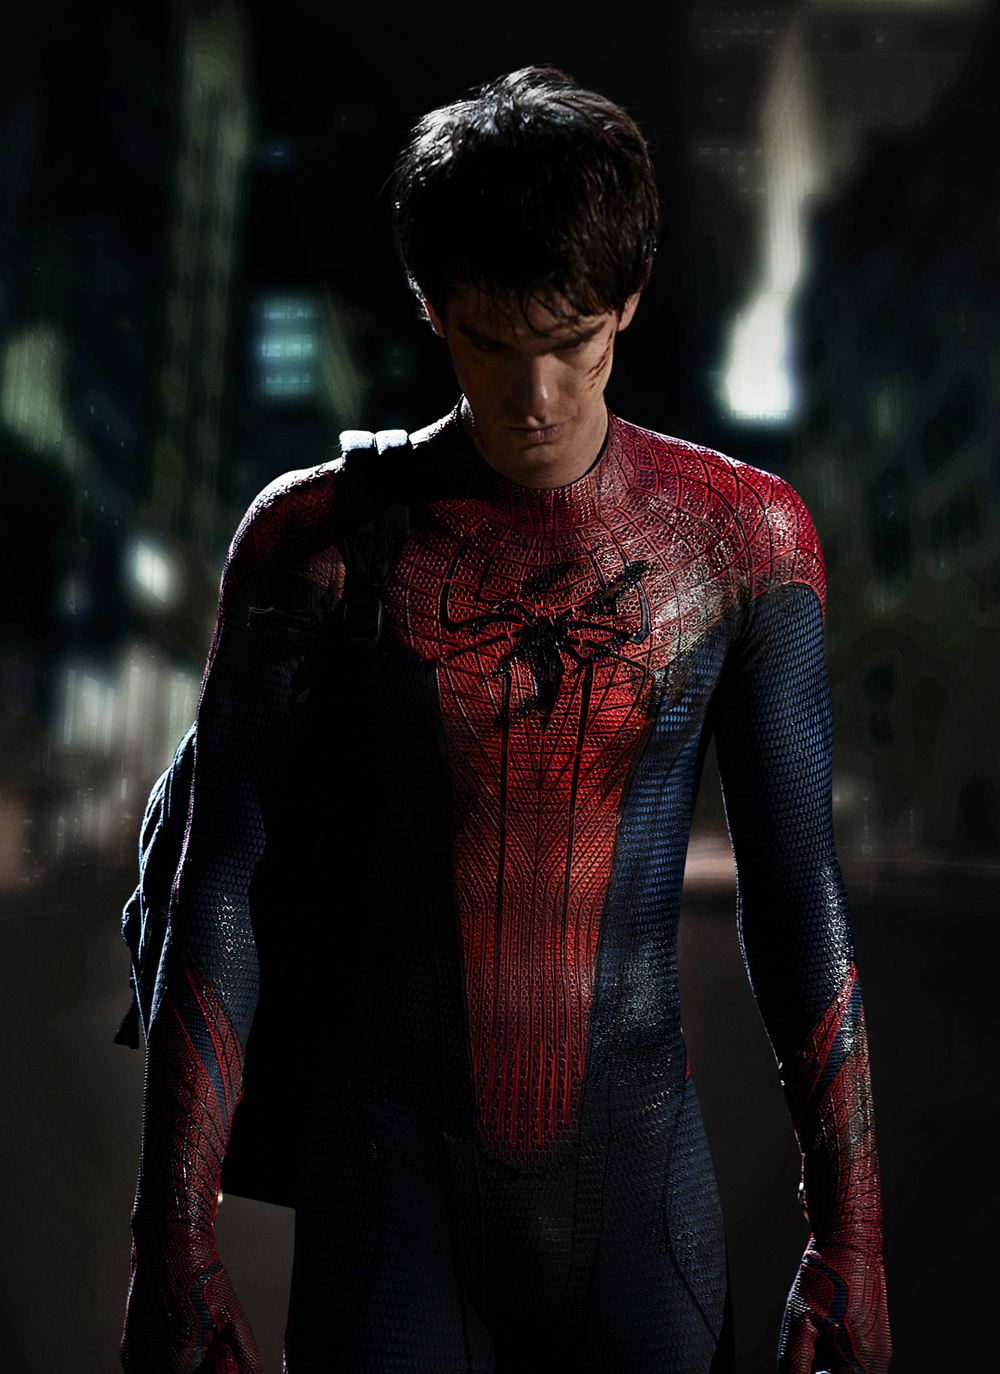 Columbia Pictures releases the first image of Andrew Garfield as Spider-Man.